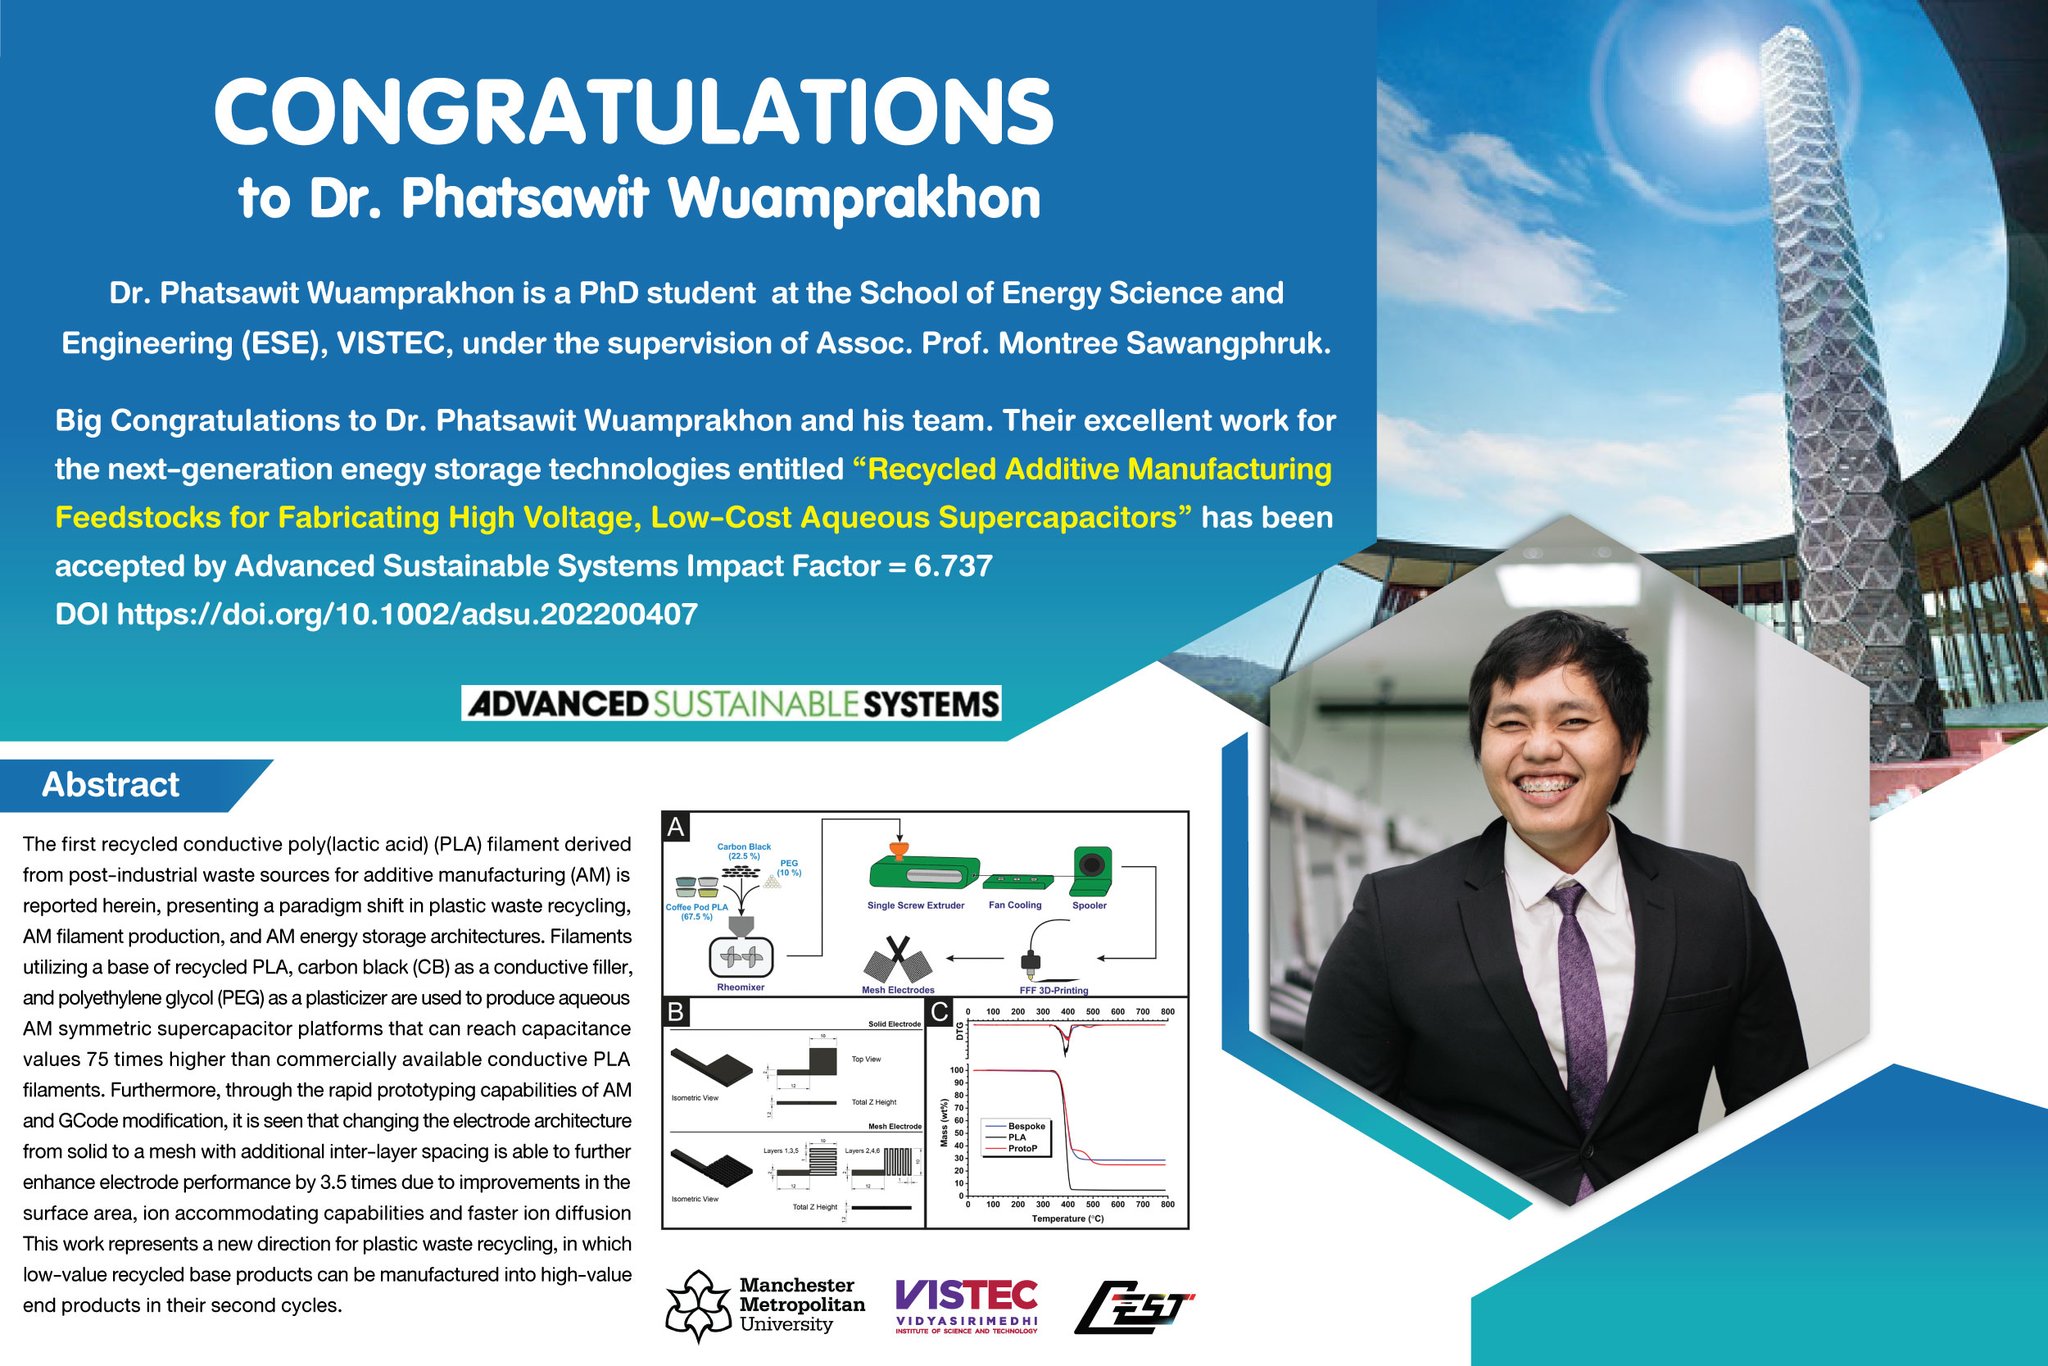 Big Congratulations to Dr. Phatsawit Wuamprakhon and his team. Their excellent work for the next-generation enegy storage technologies entitled “Recycled Additive Manufacturing Feedstocks for Fabricating High Voltage, Low-Cost Aqueous Supercapacitors” has